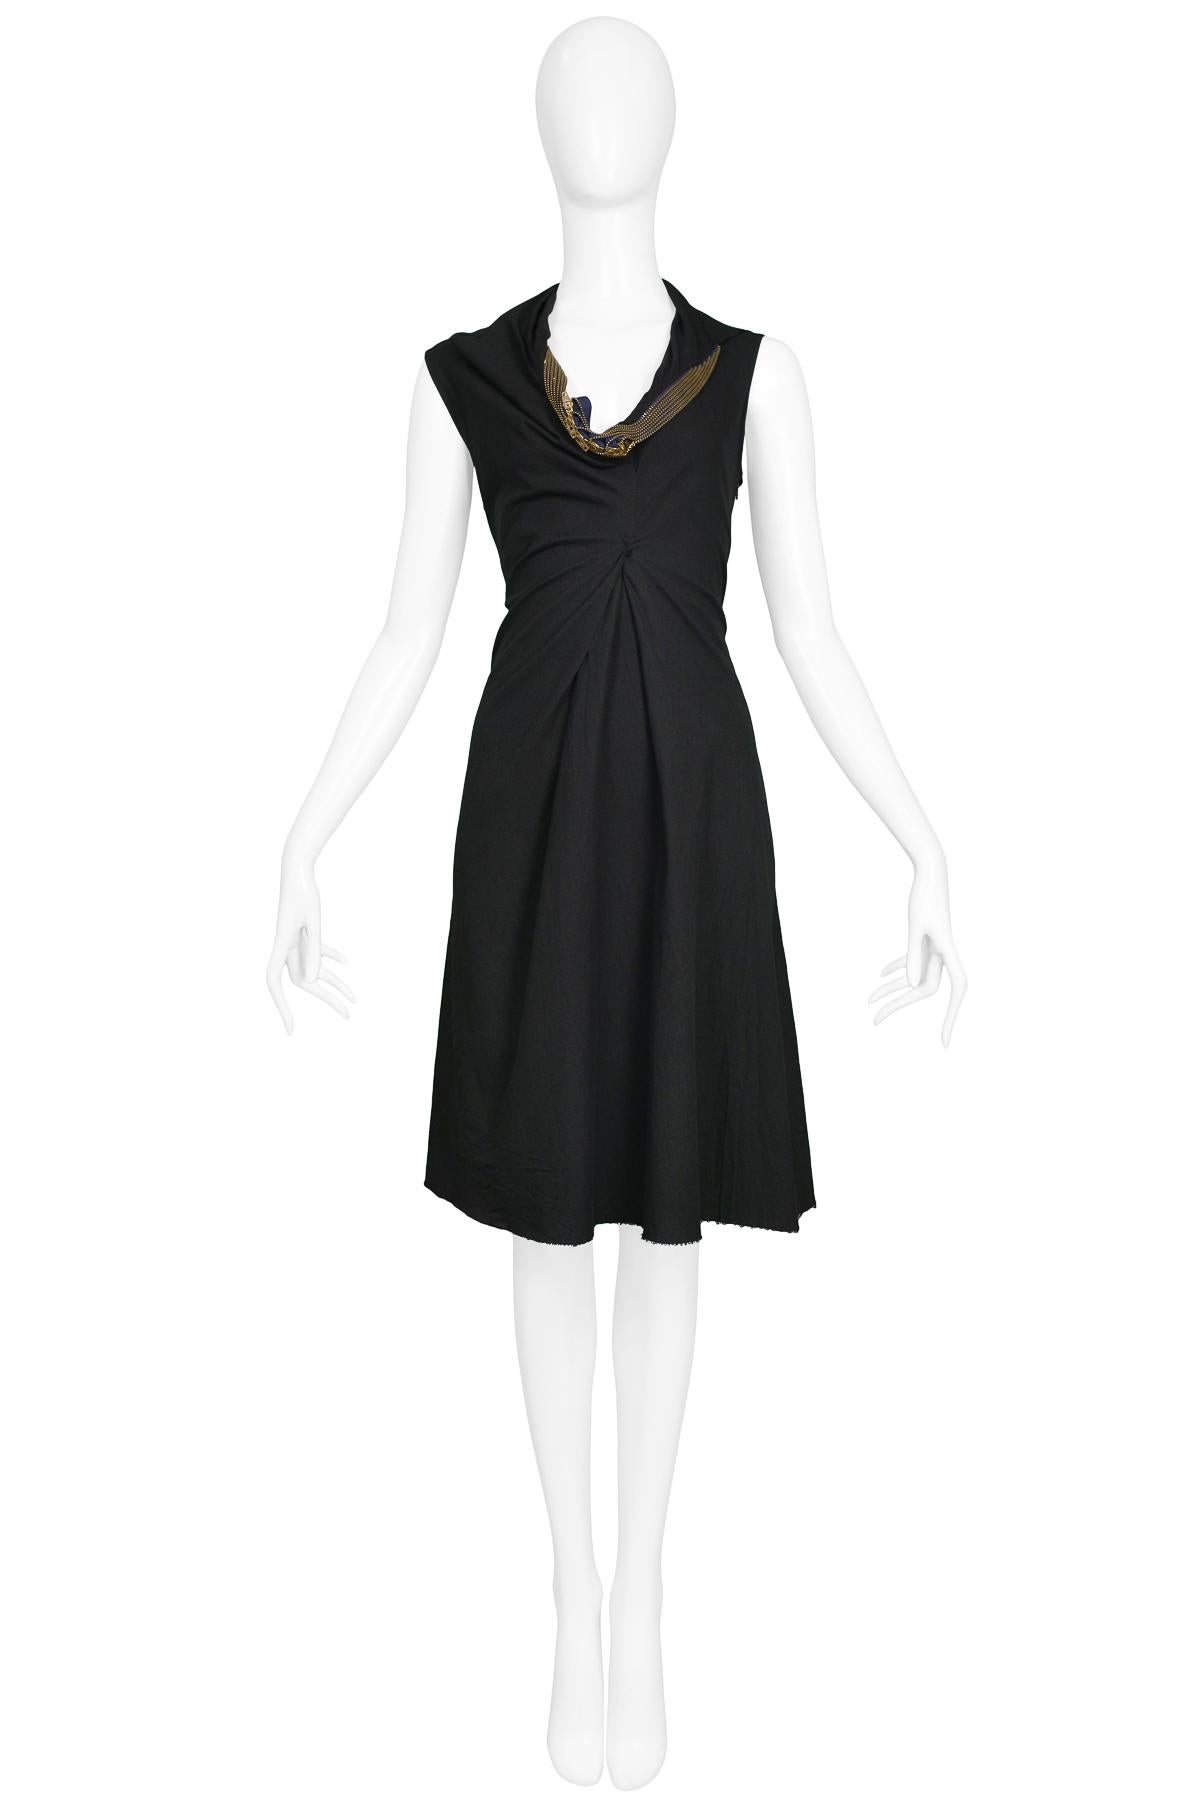 Resurrection Vintage is excited to offer a vintage Junya Watanabe black cotton sleeveless knee-length dress featuring multiple brass zippers encircling the collar. 

Junya Watanabe
Size: Small
Measurements: Bust 34